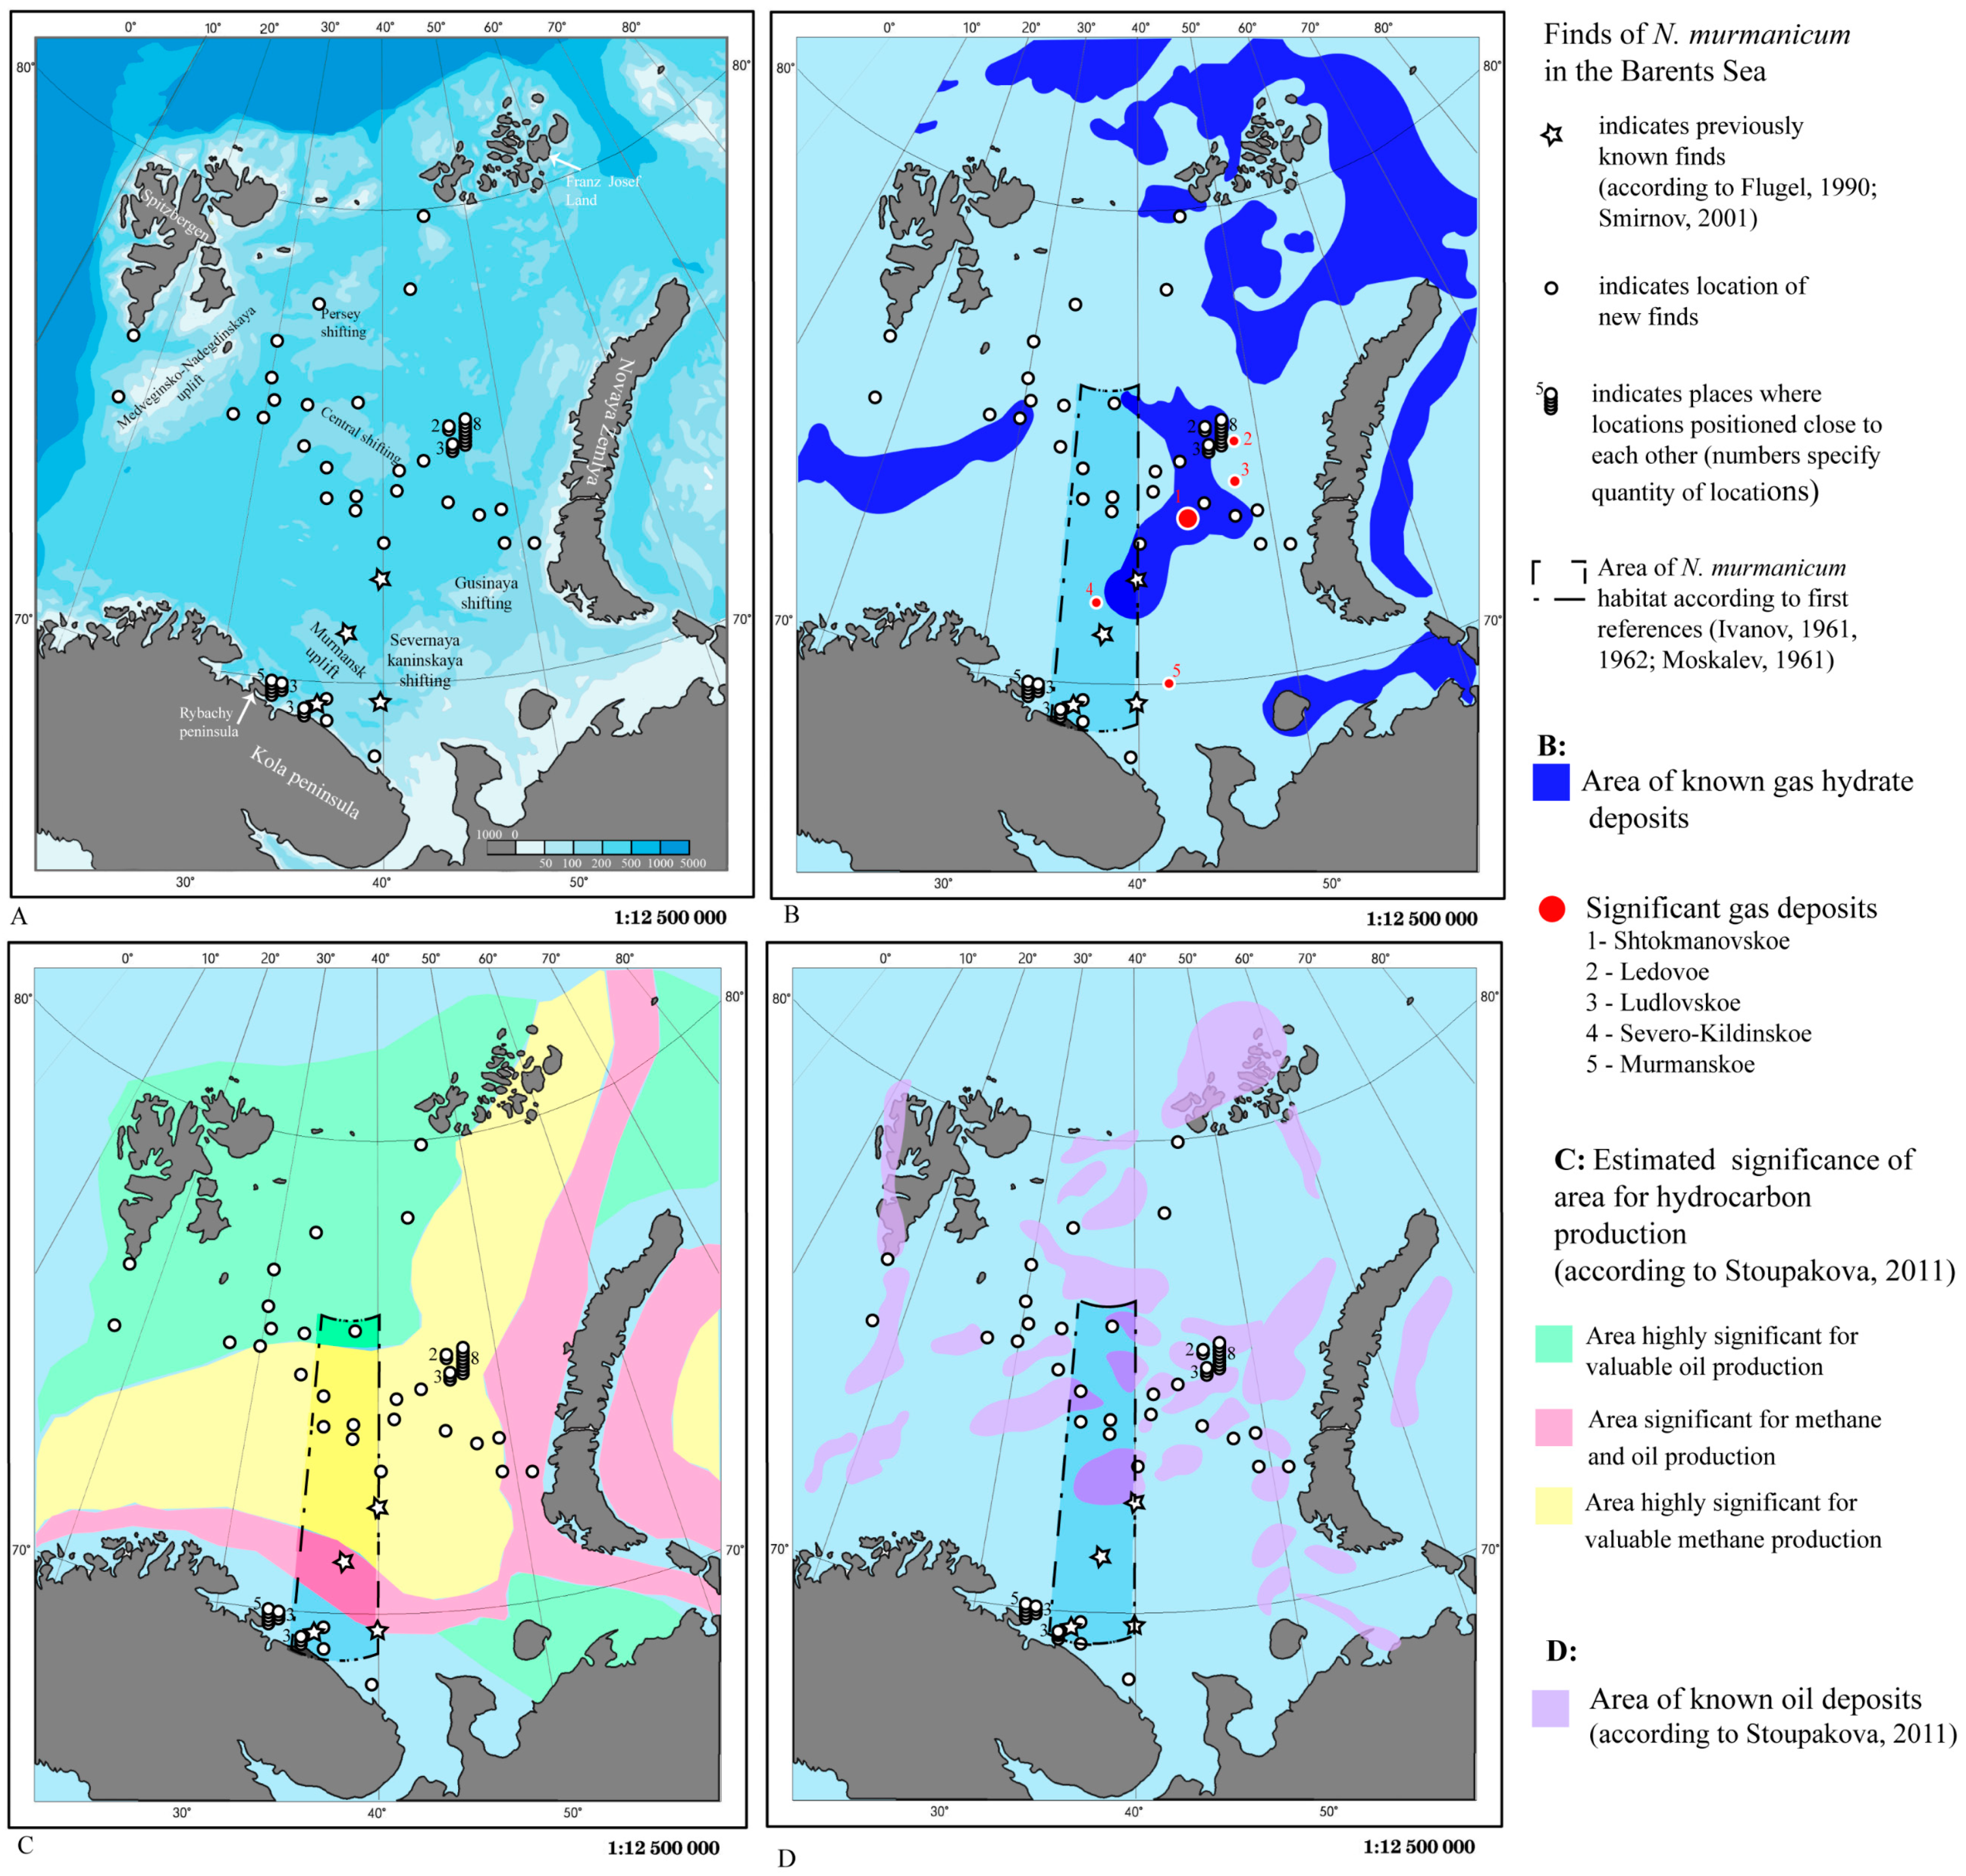 JMSE | Free Full-Text | Distribution of Nereilinum murmanicum (Annelida,  Siboglinidae) in the Barents Sea in the Context of Its Oil and Gas Potential